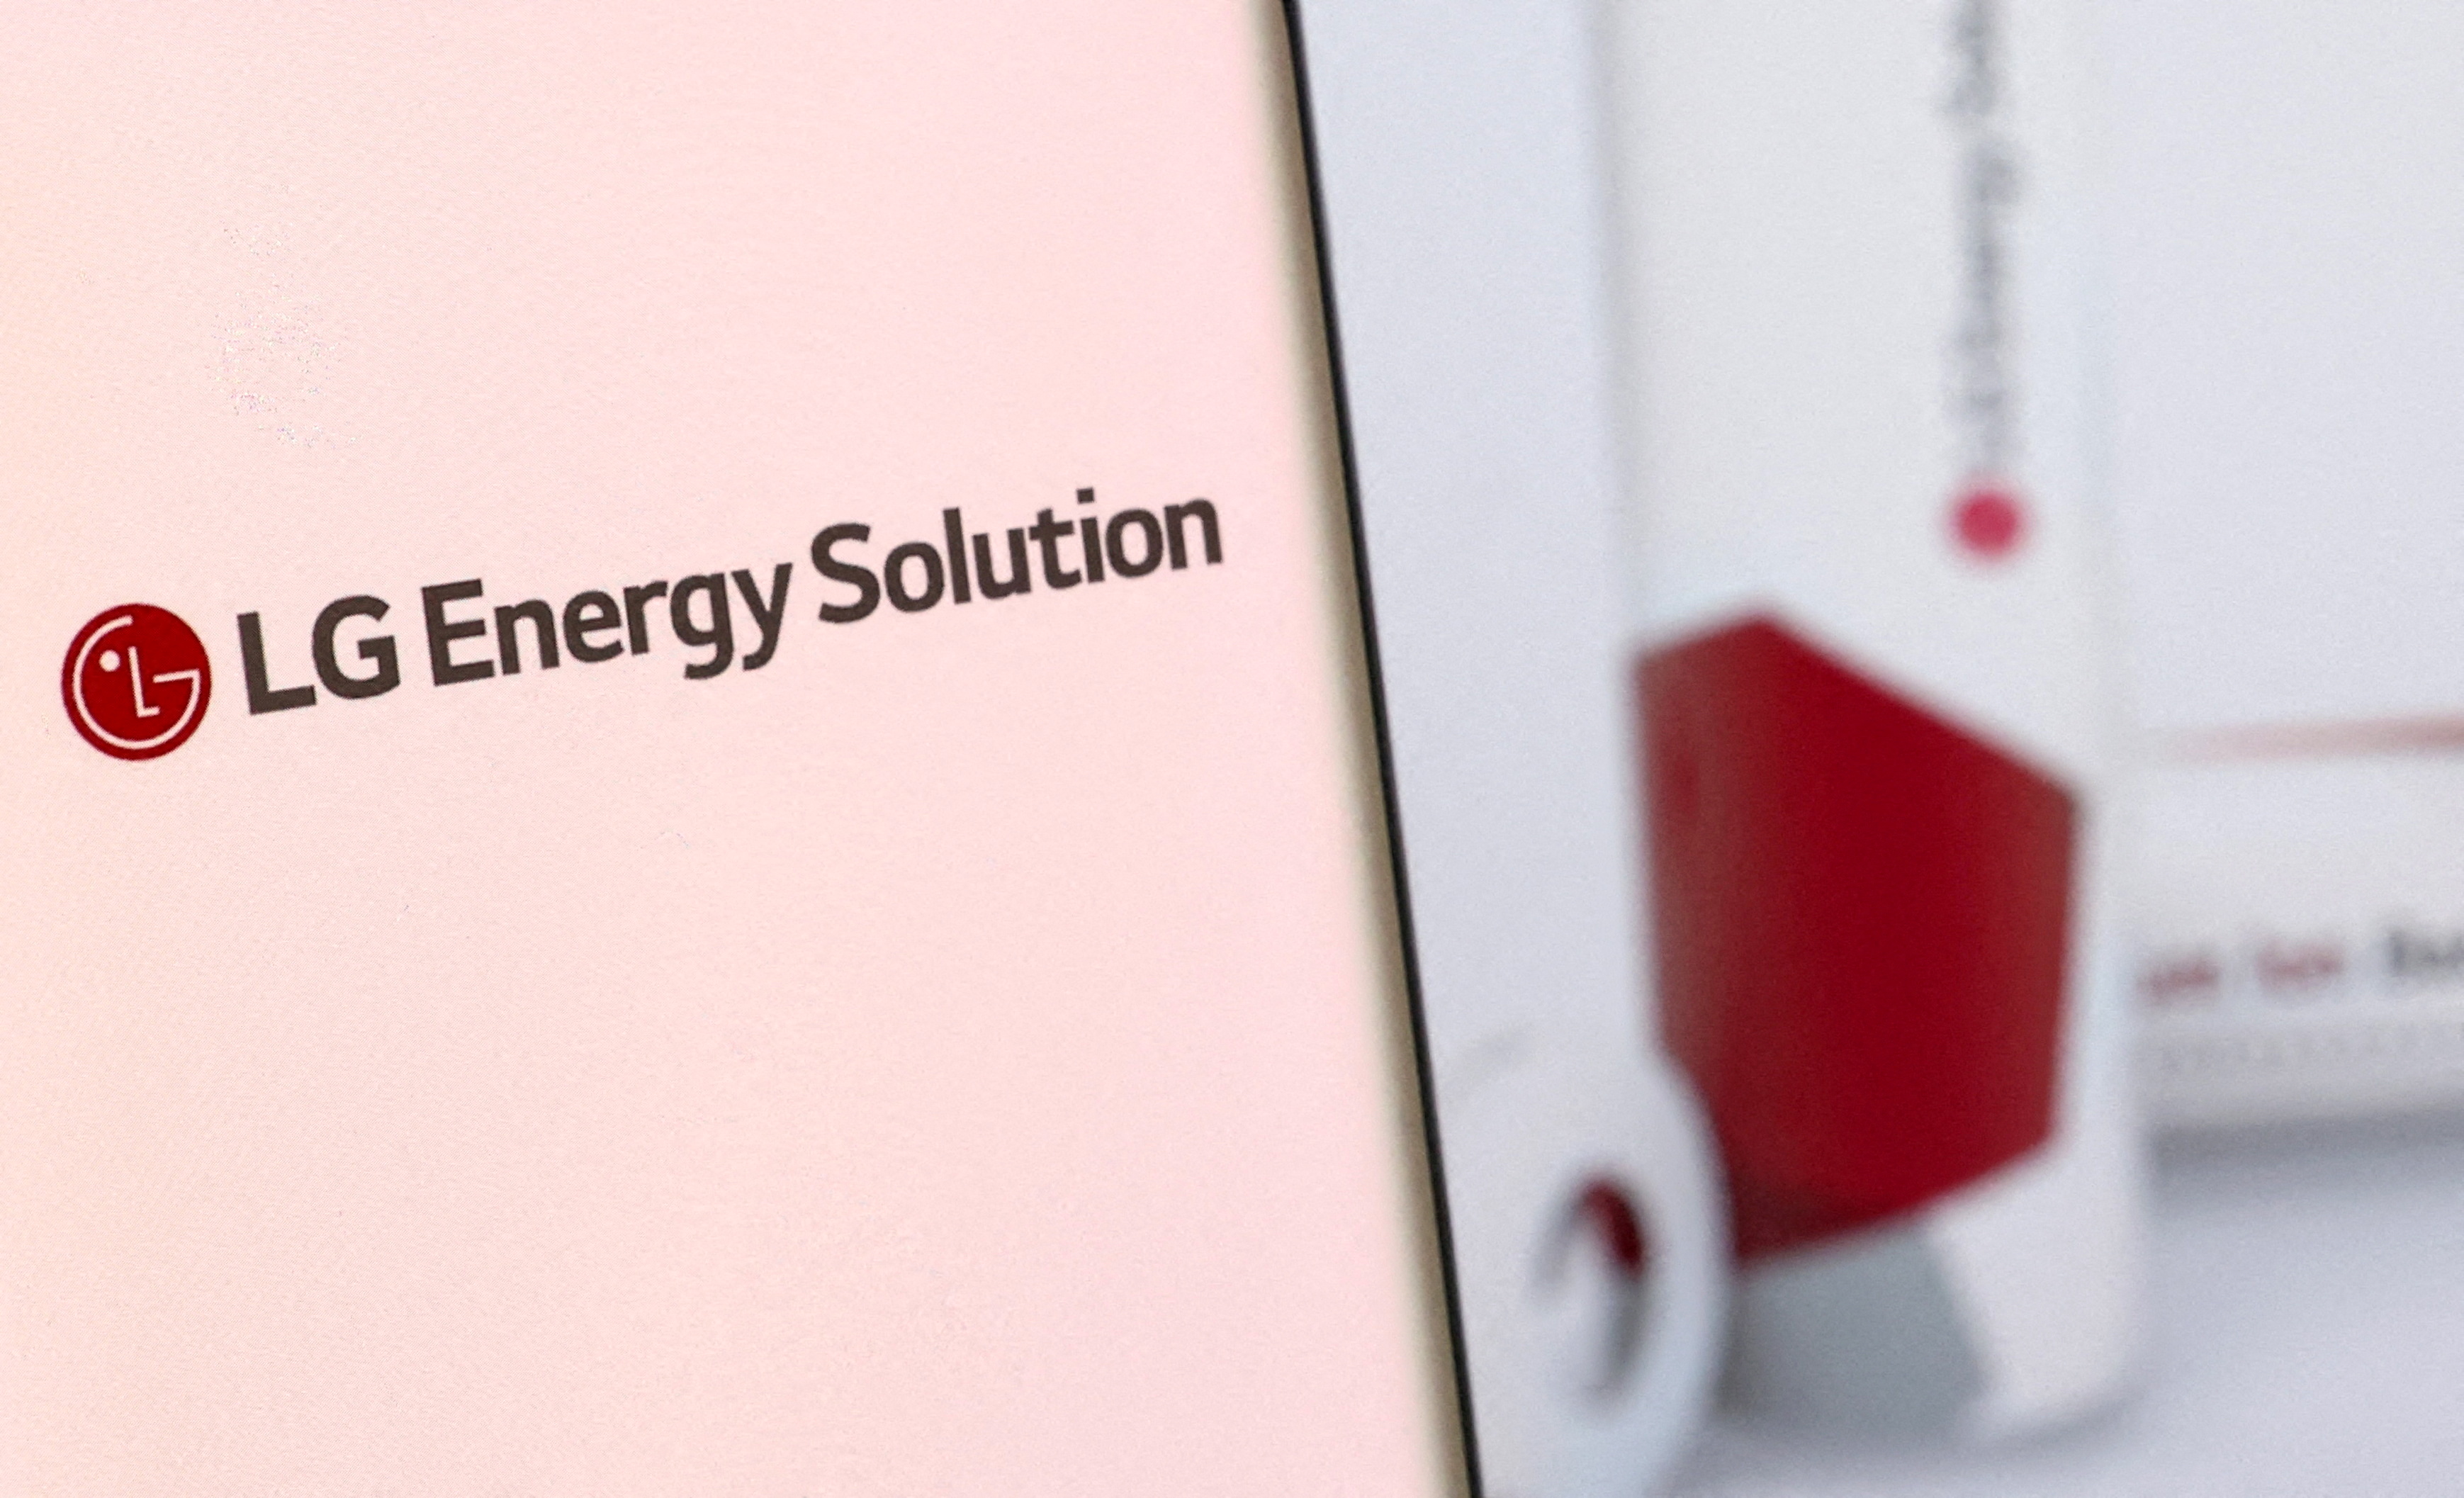 Illustration shows smartphone with LG Energy Solution's logo